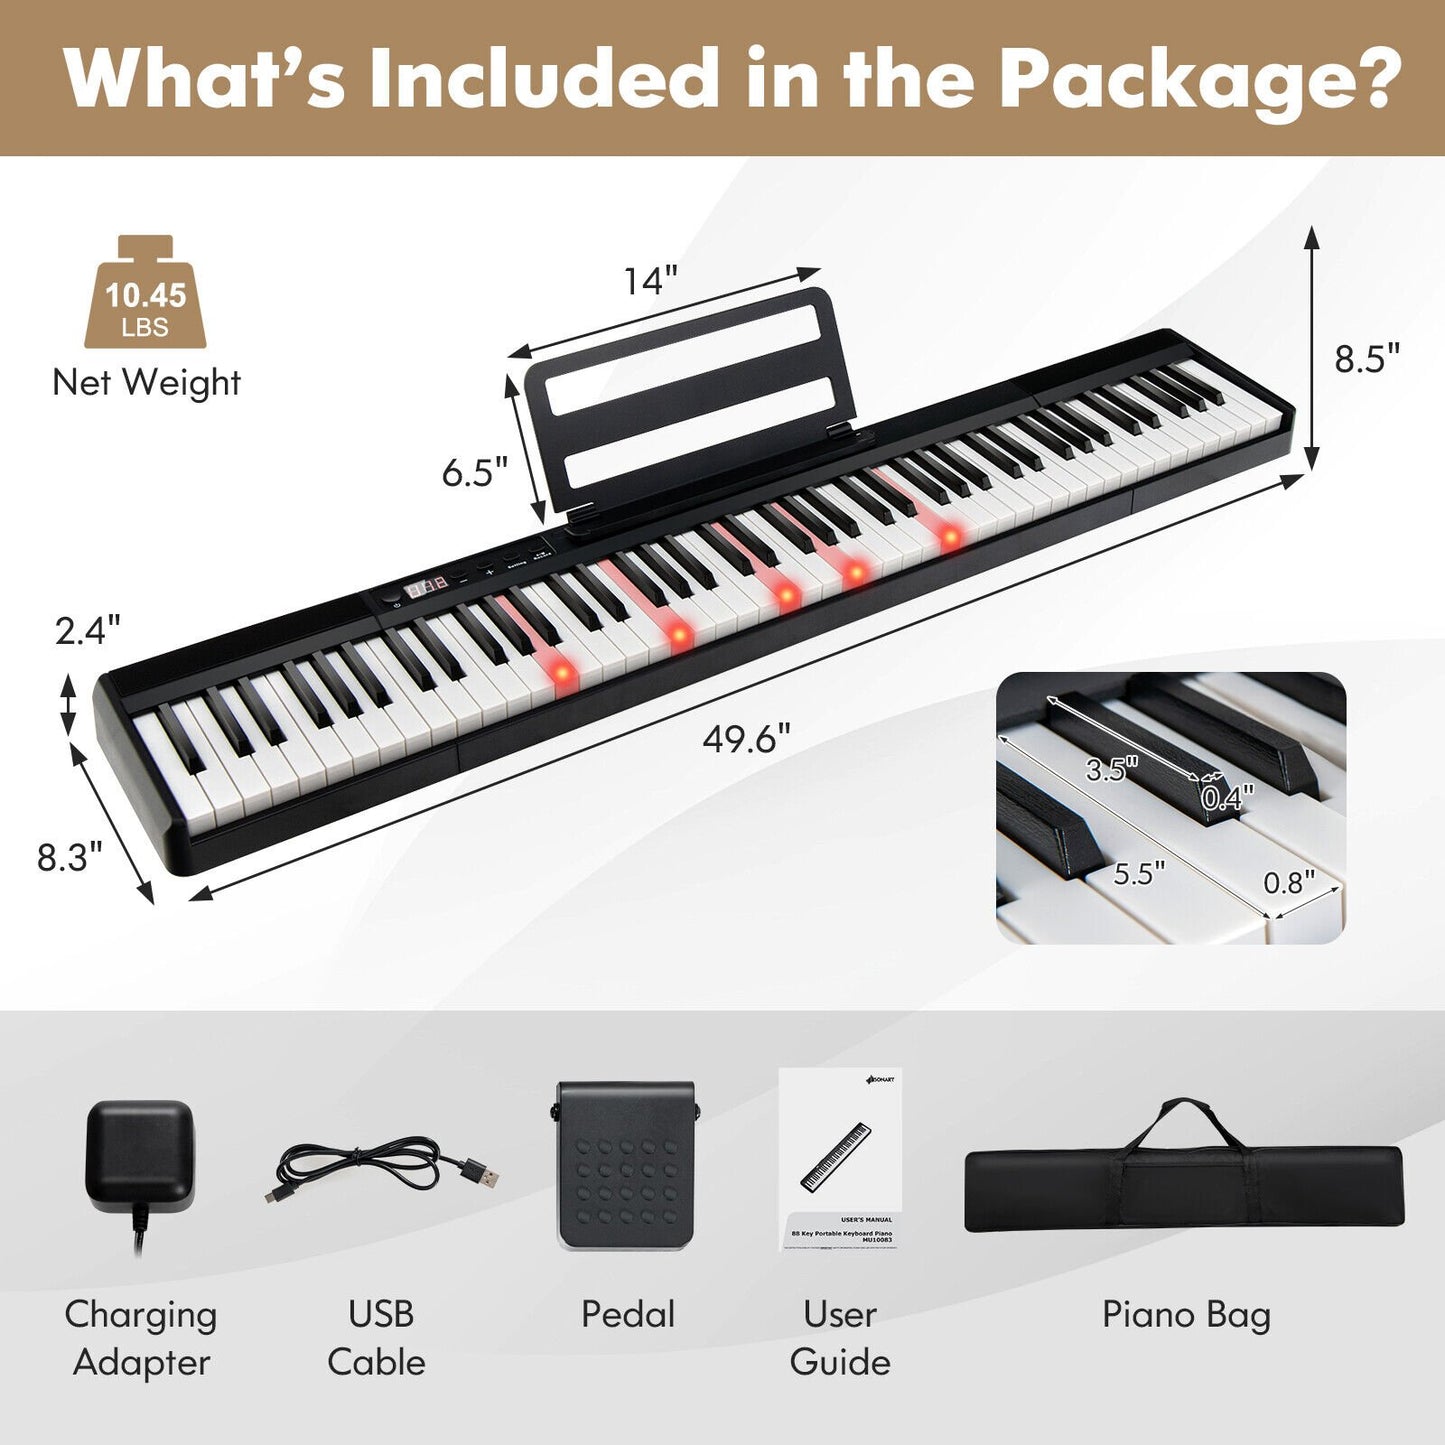 88-Key Portable Electric Lighted Keyboard Piano, Black